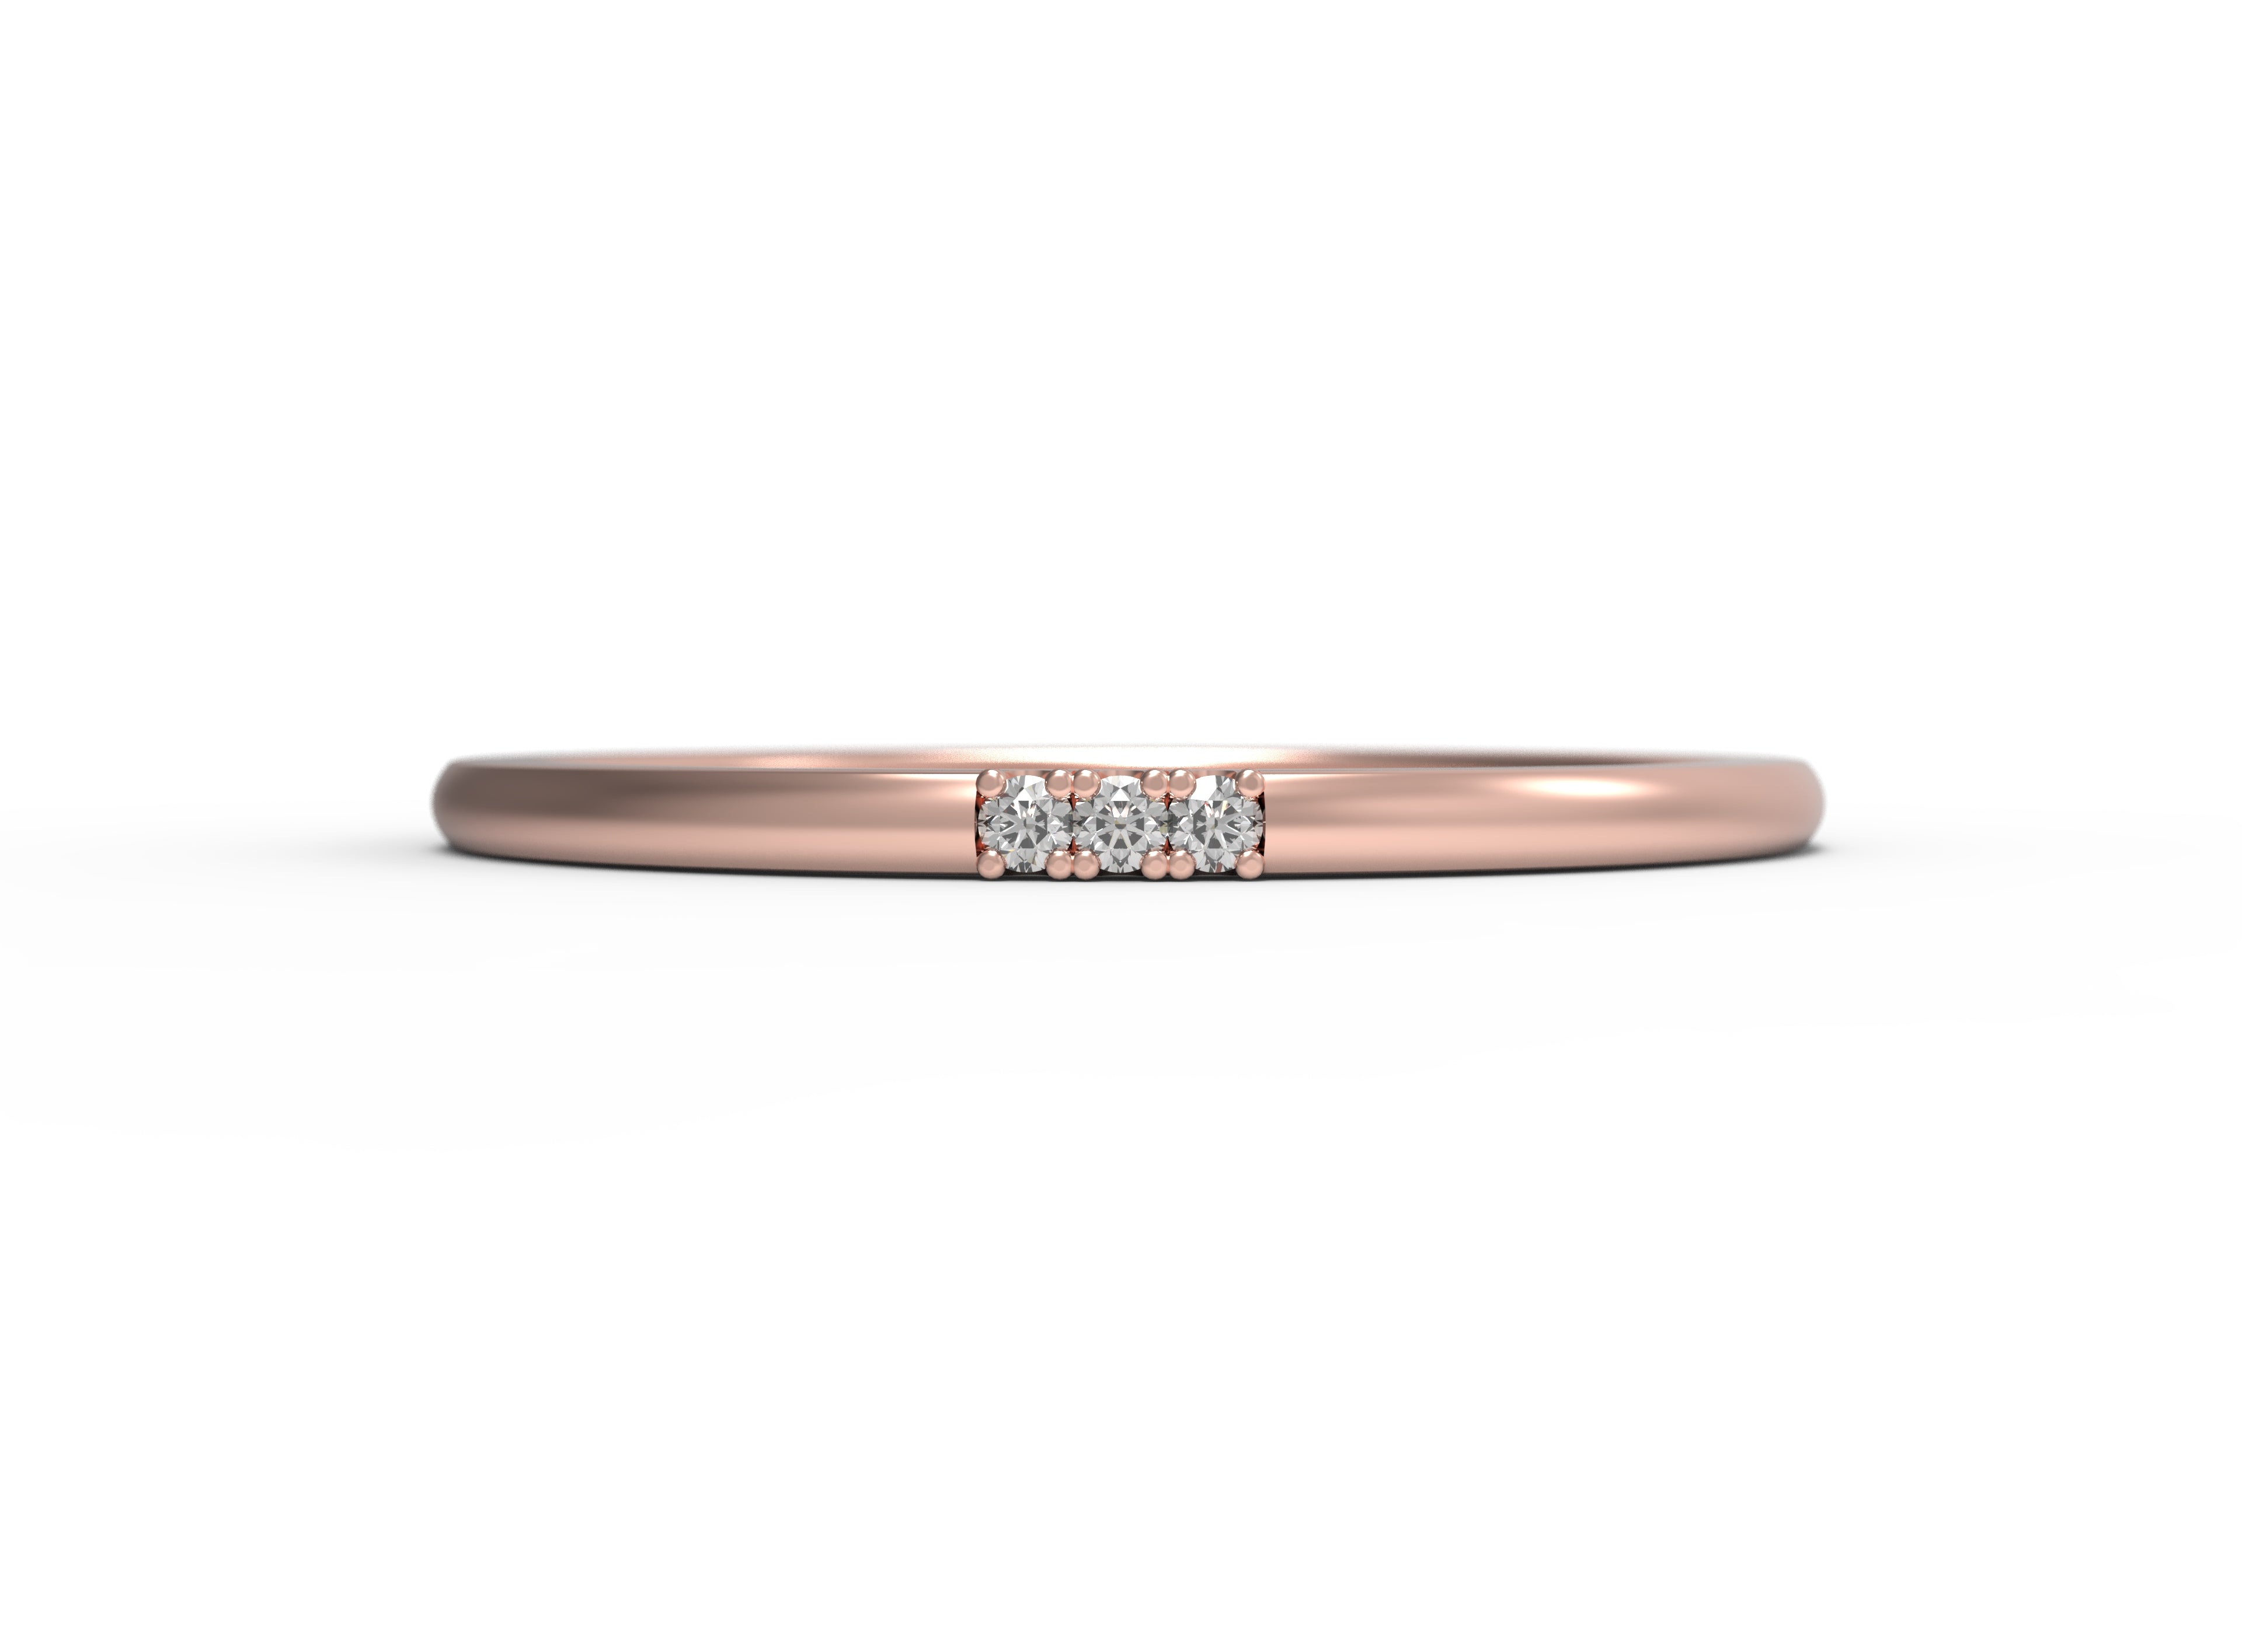 Close up of the Pave Jane womens wedding band by Fluid Jewellery in rose gold